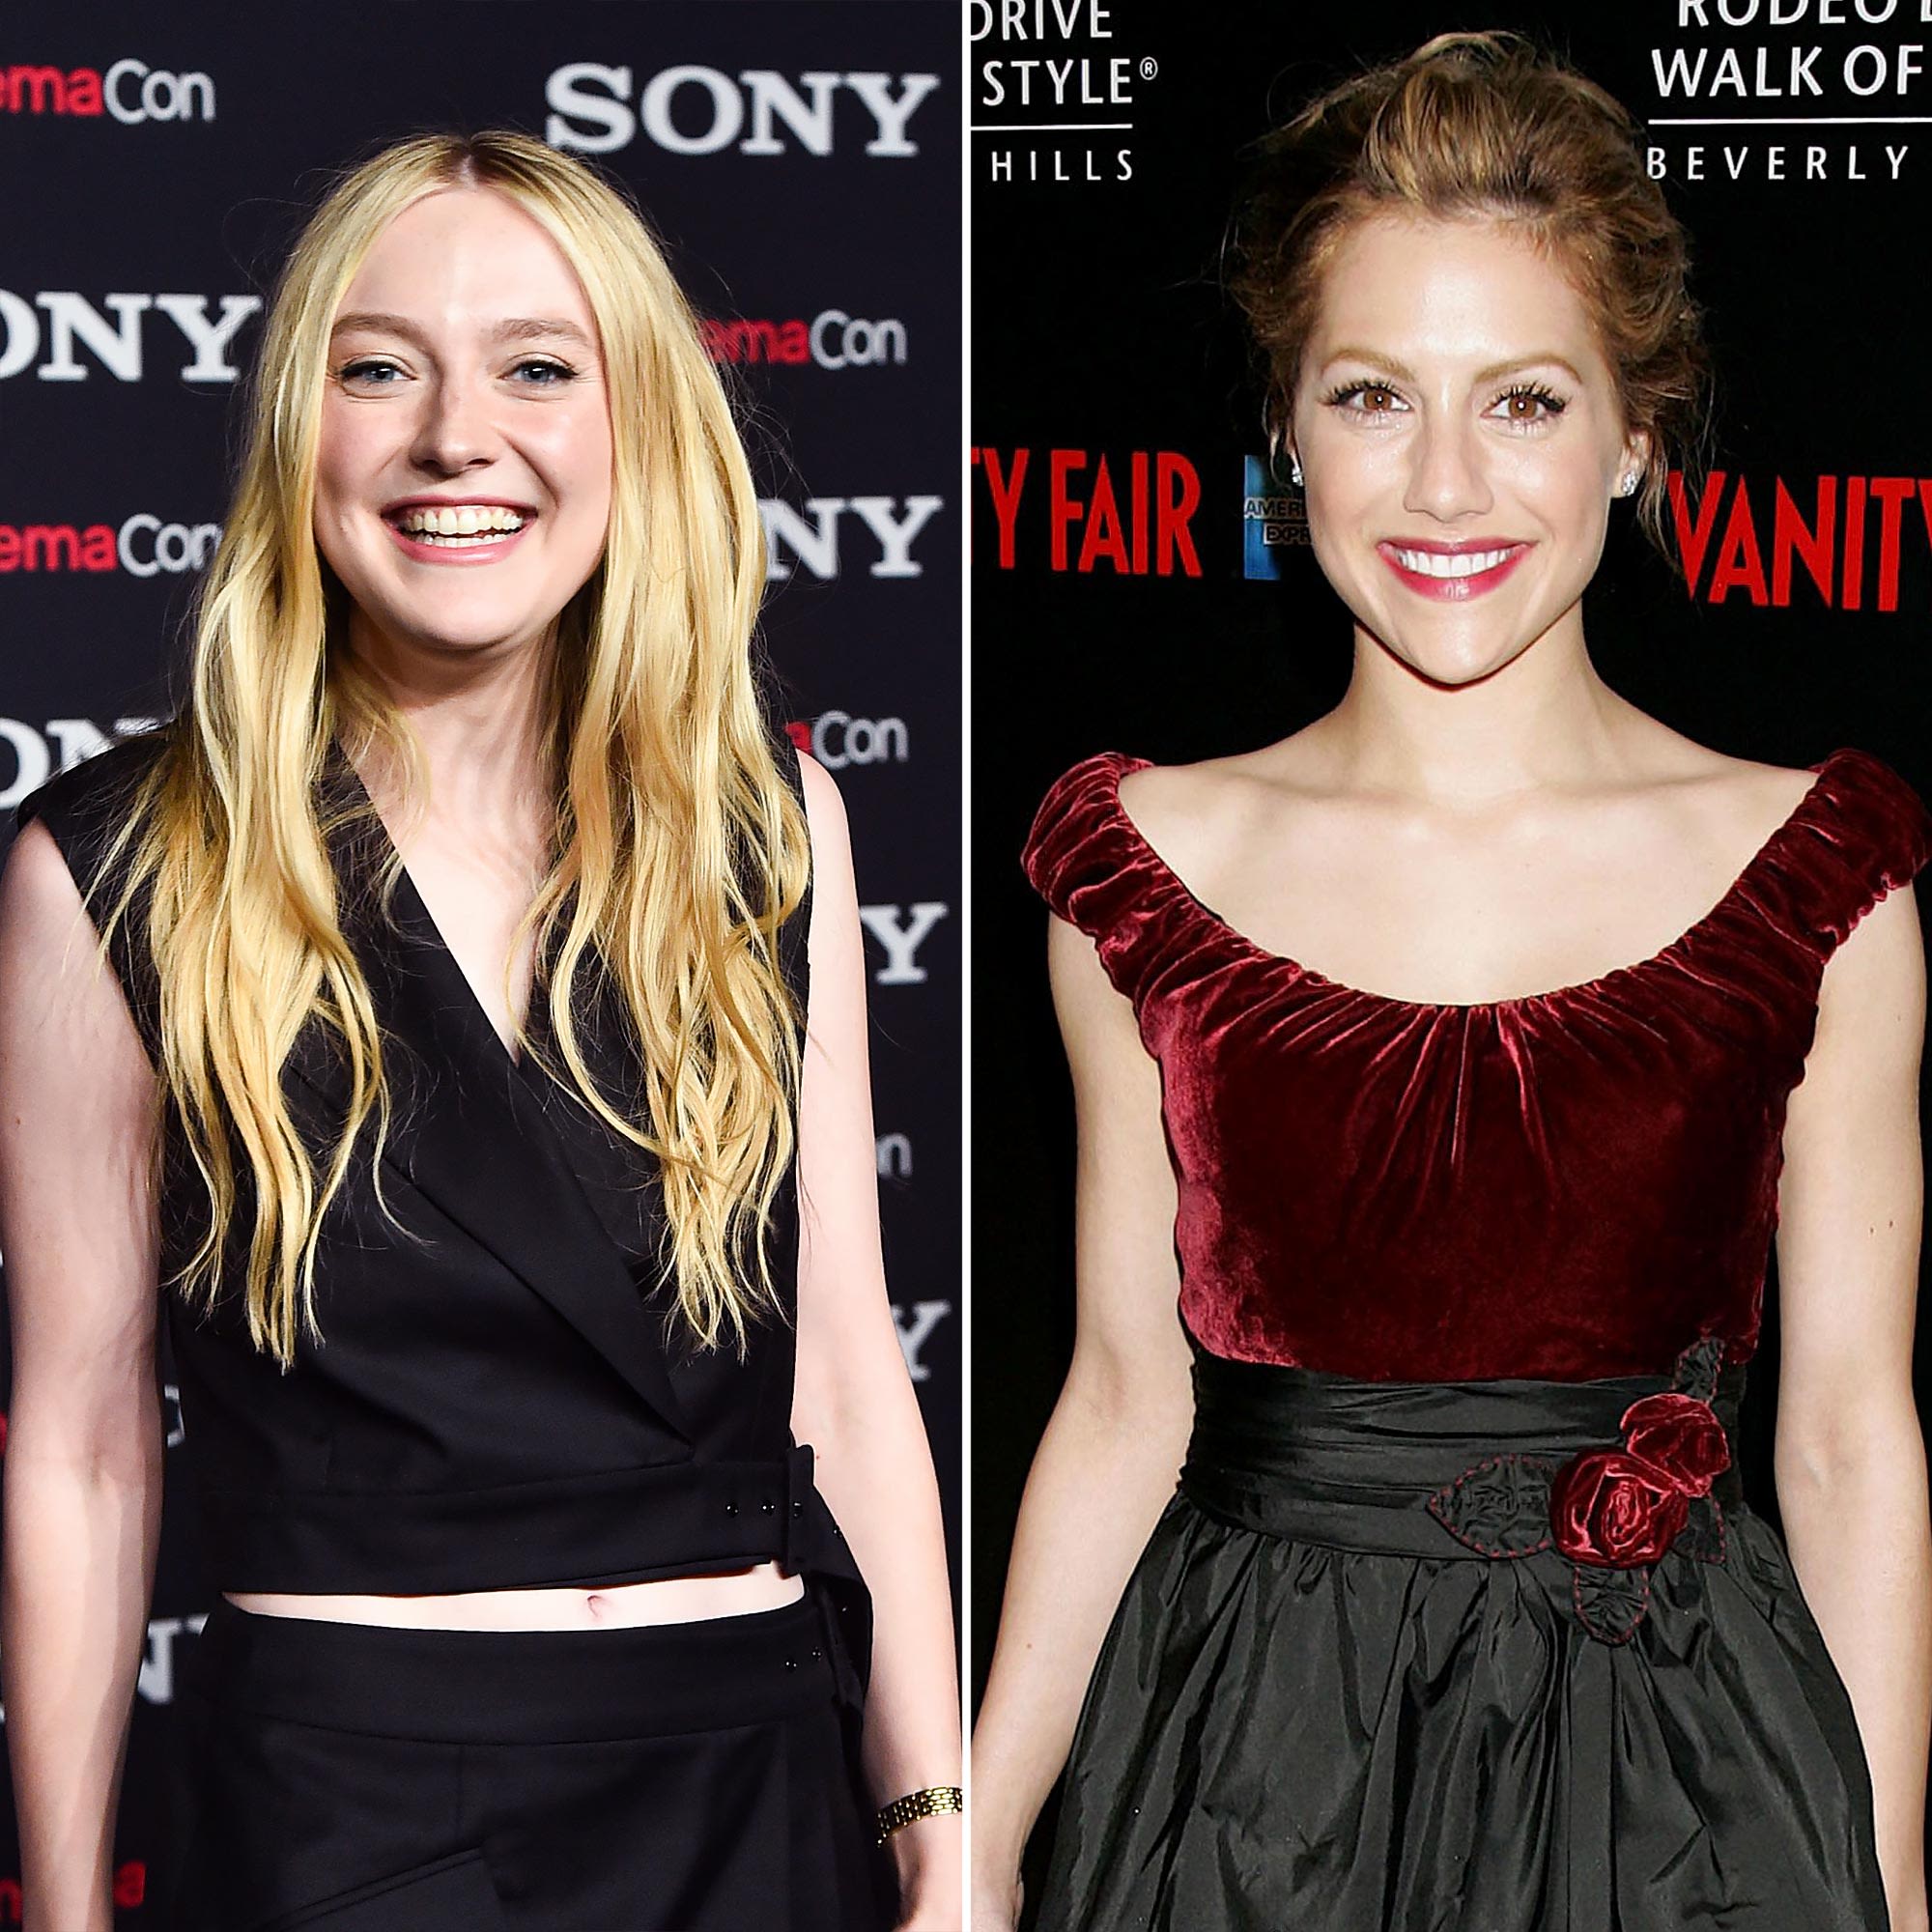 Dakota Fanning Gushes Over Brittany Murphy After ‘Uptown Girls’ Clips Go Viral: ‘I Still Miss Her’